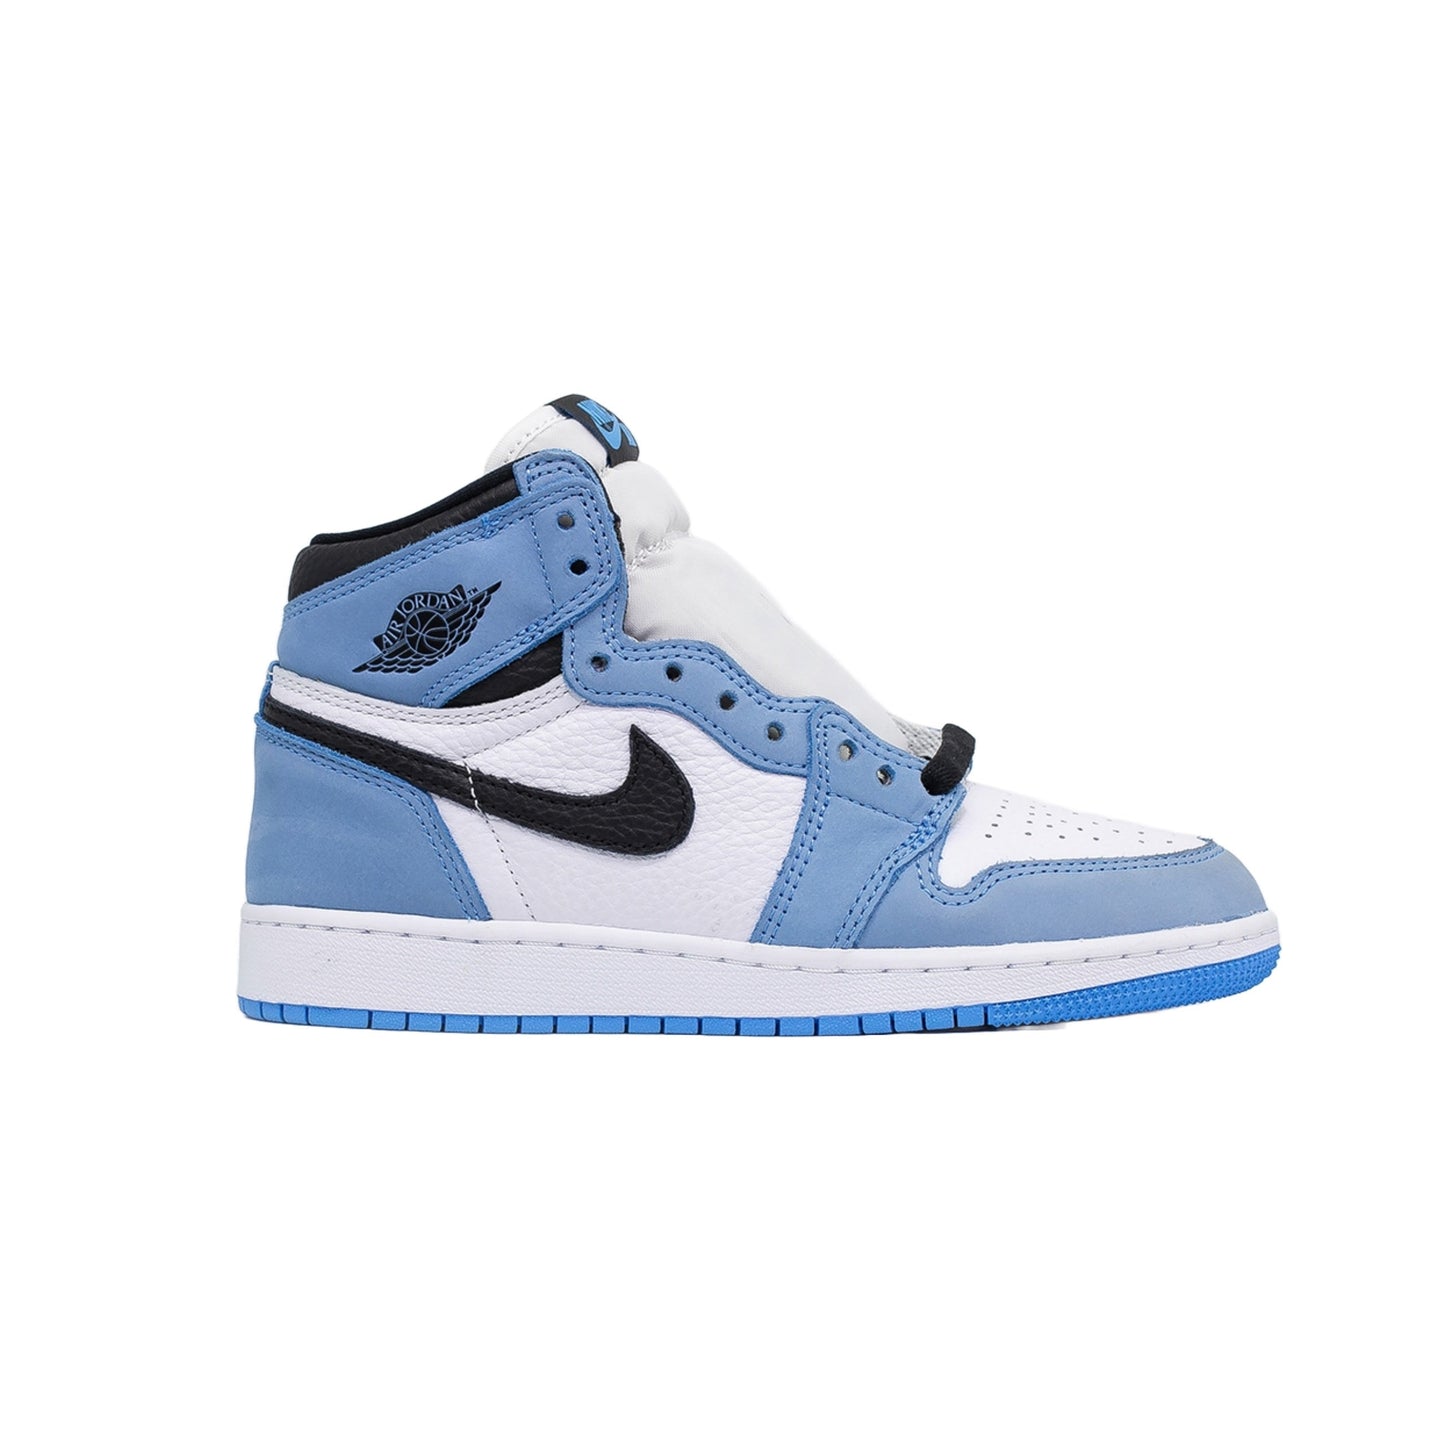 Air The Air Jordan continues to surprise fans of the number one model (GS), University Blue